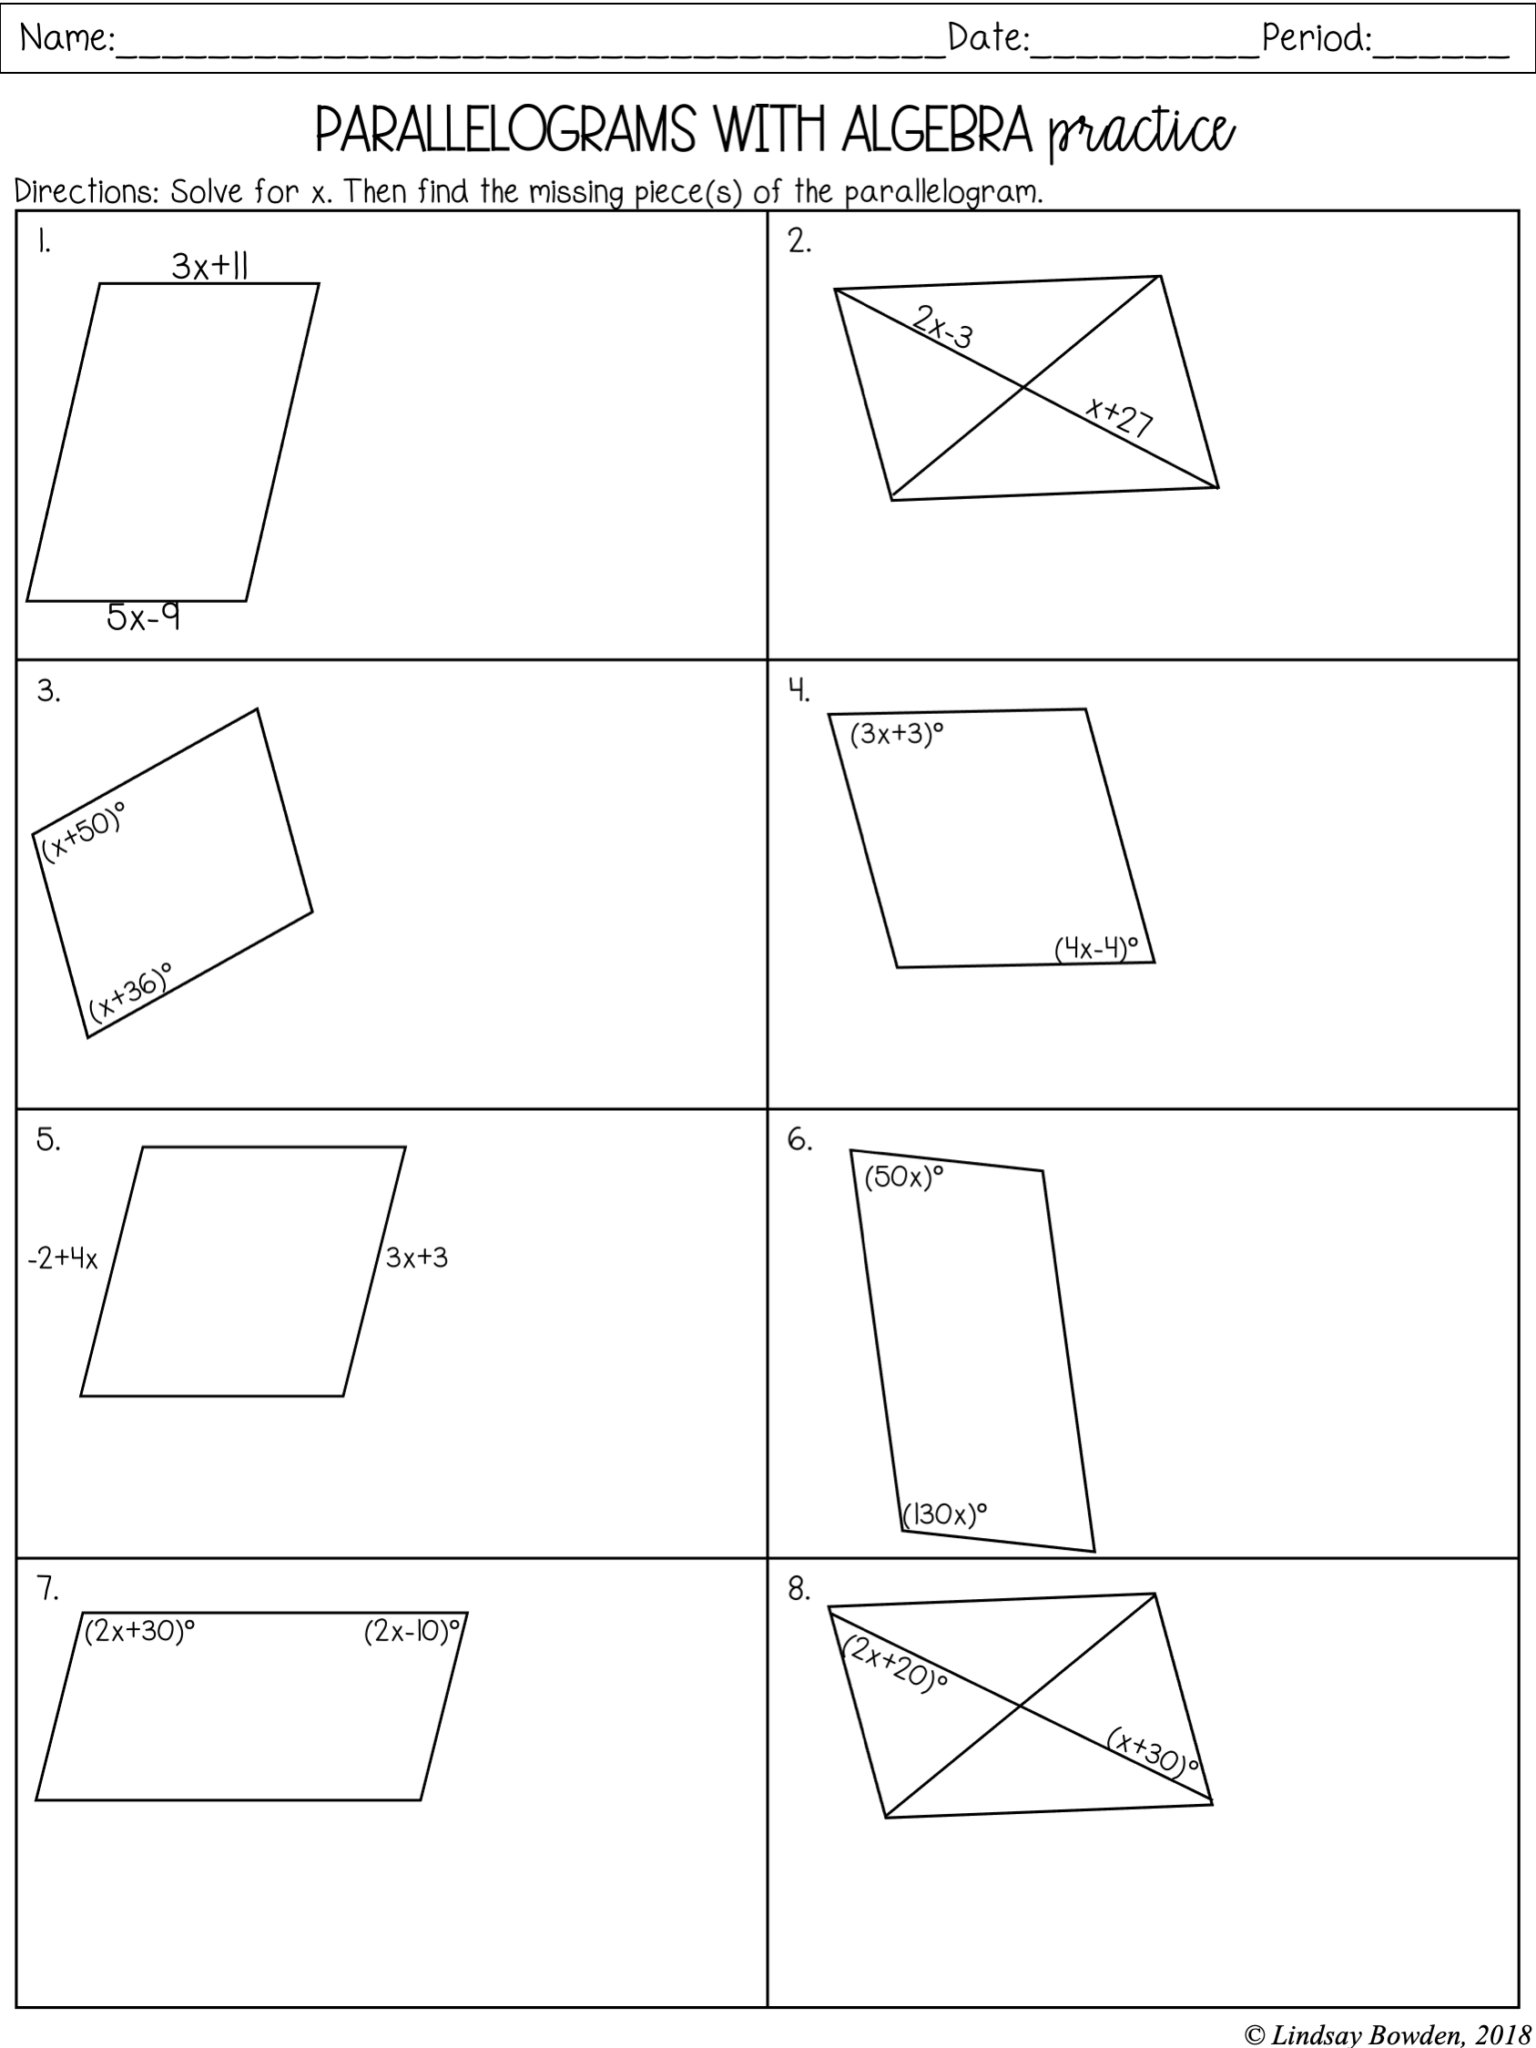 Parallelograms Notes and Worksheets Lindsay Bowden